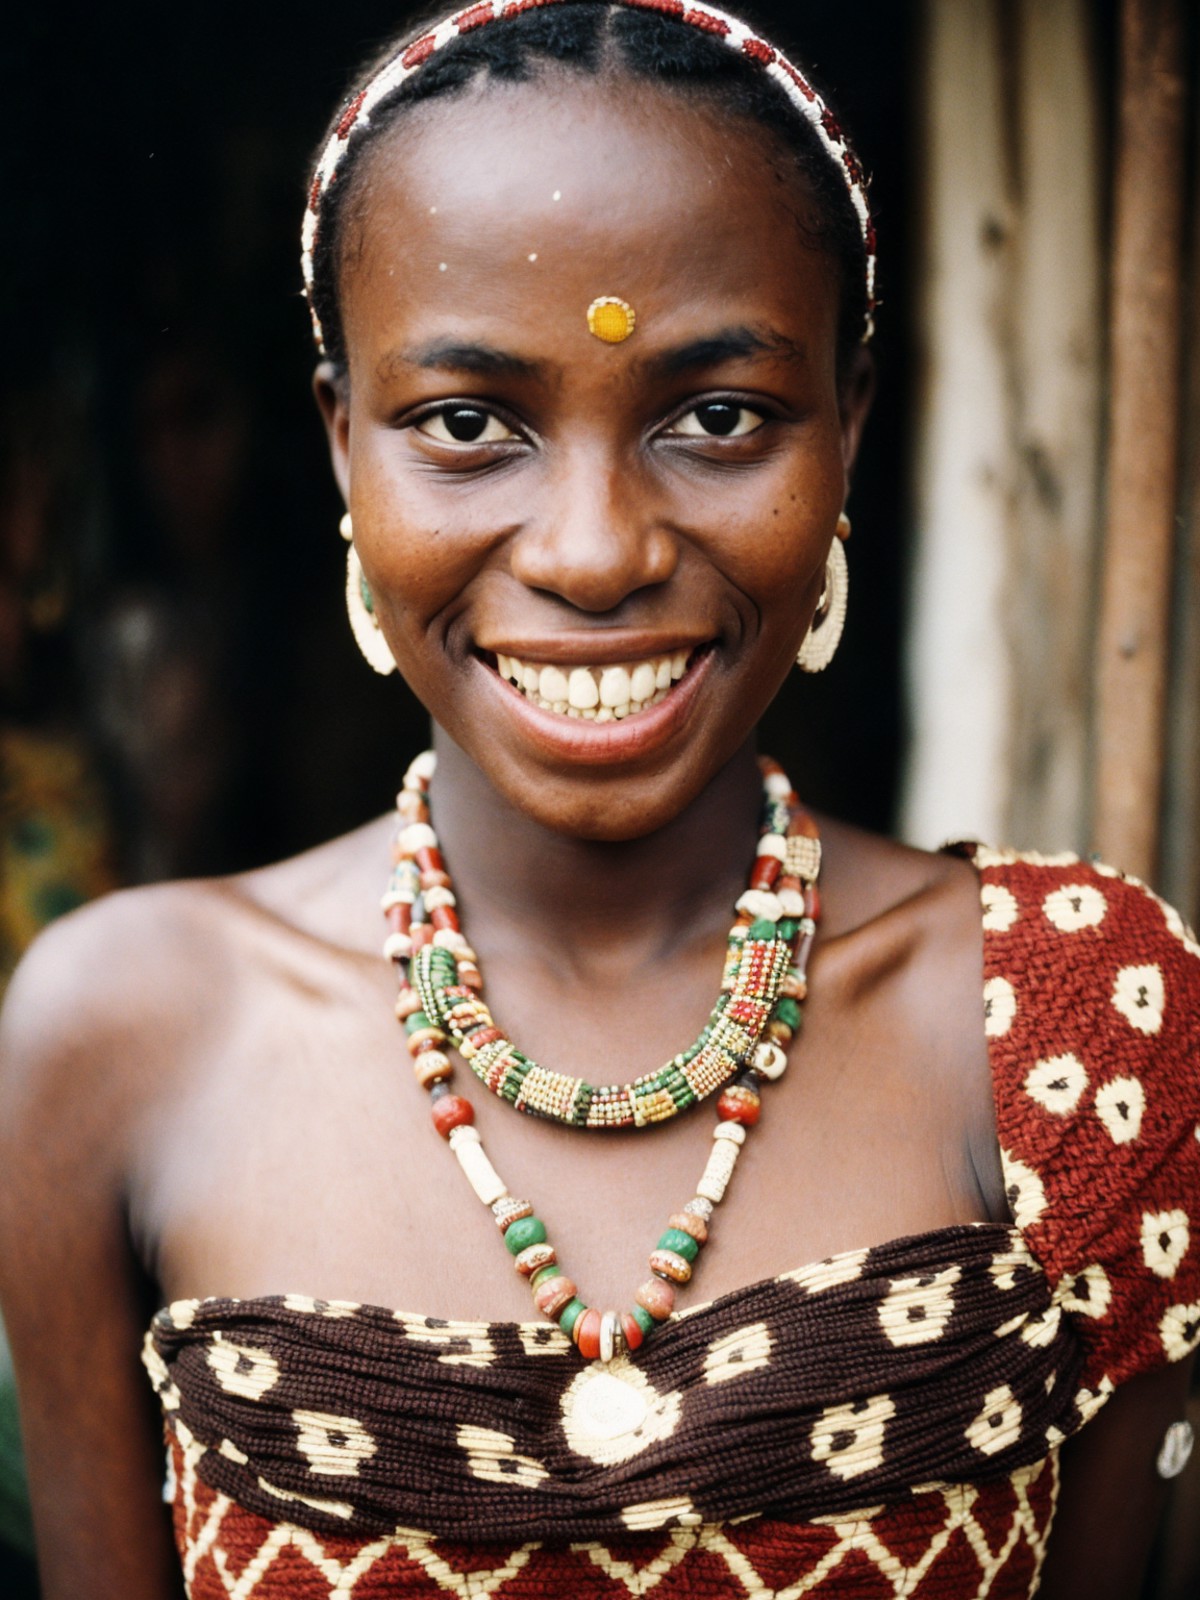 film grain analog photography,african woman, wide-eyed expression, joyful, masterpieces, surprised, open-mouthed smile, tr...